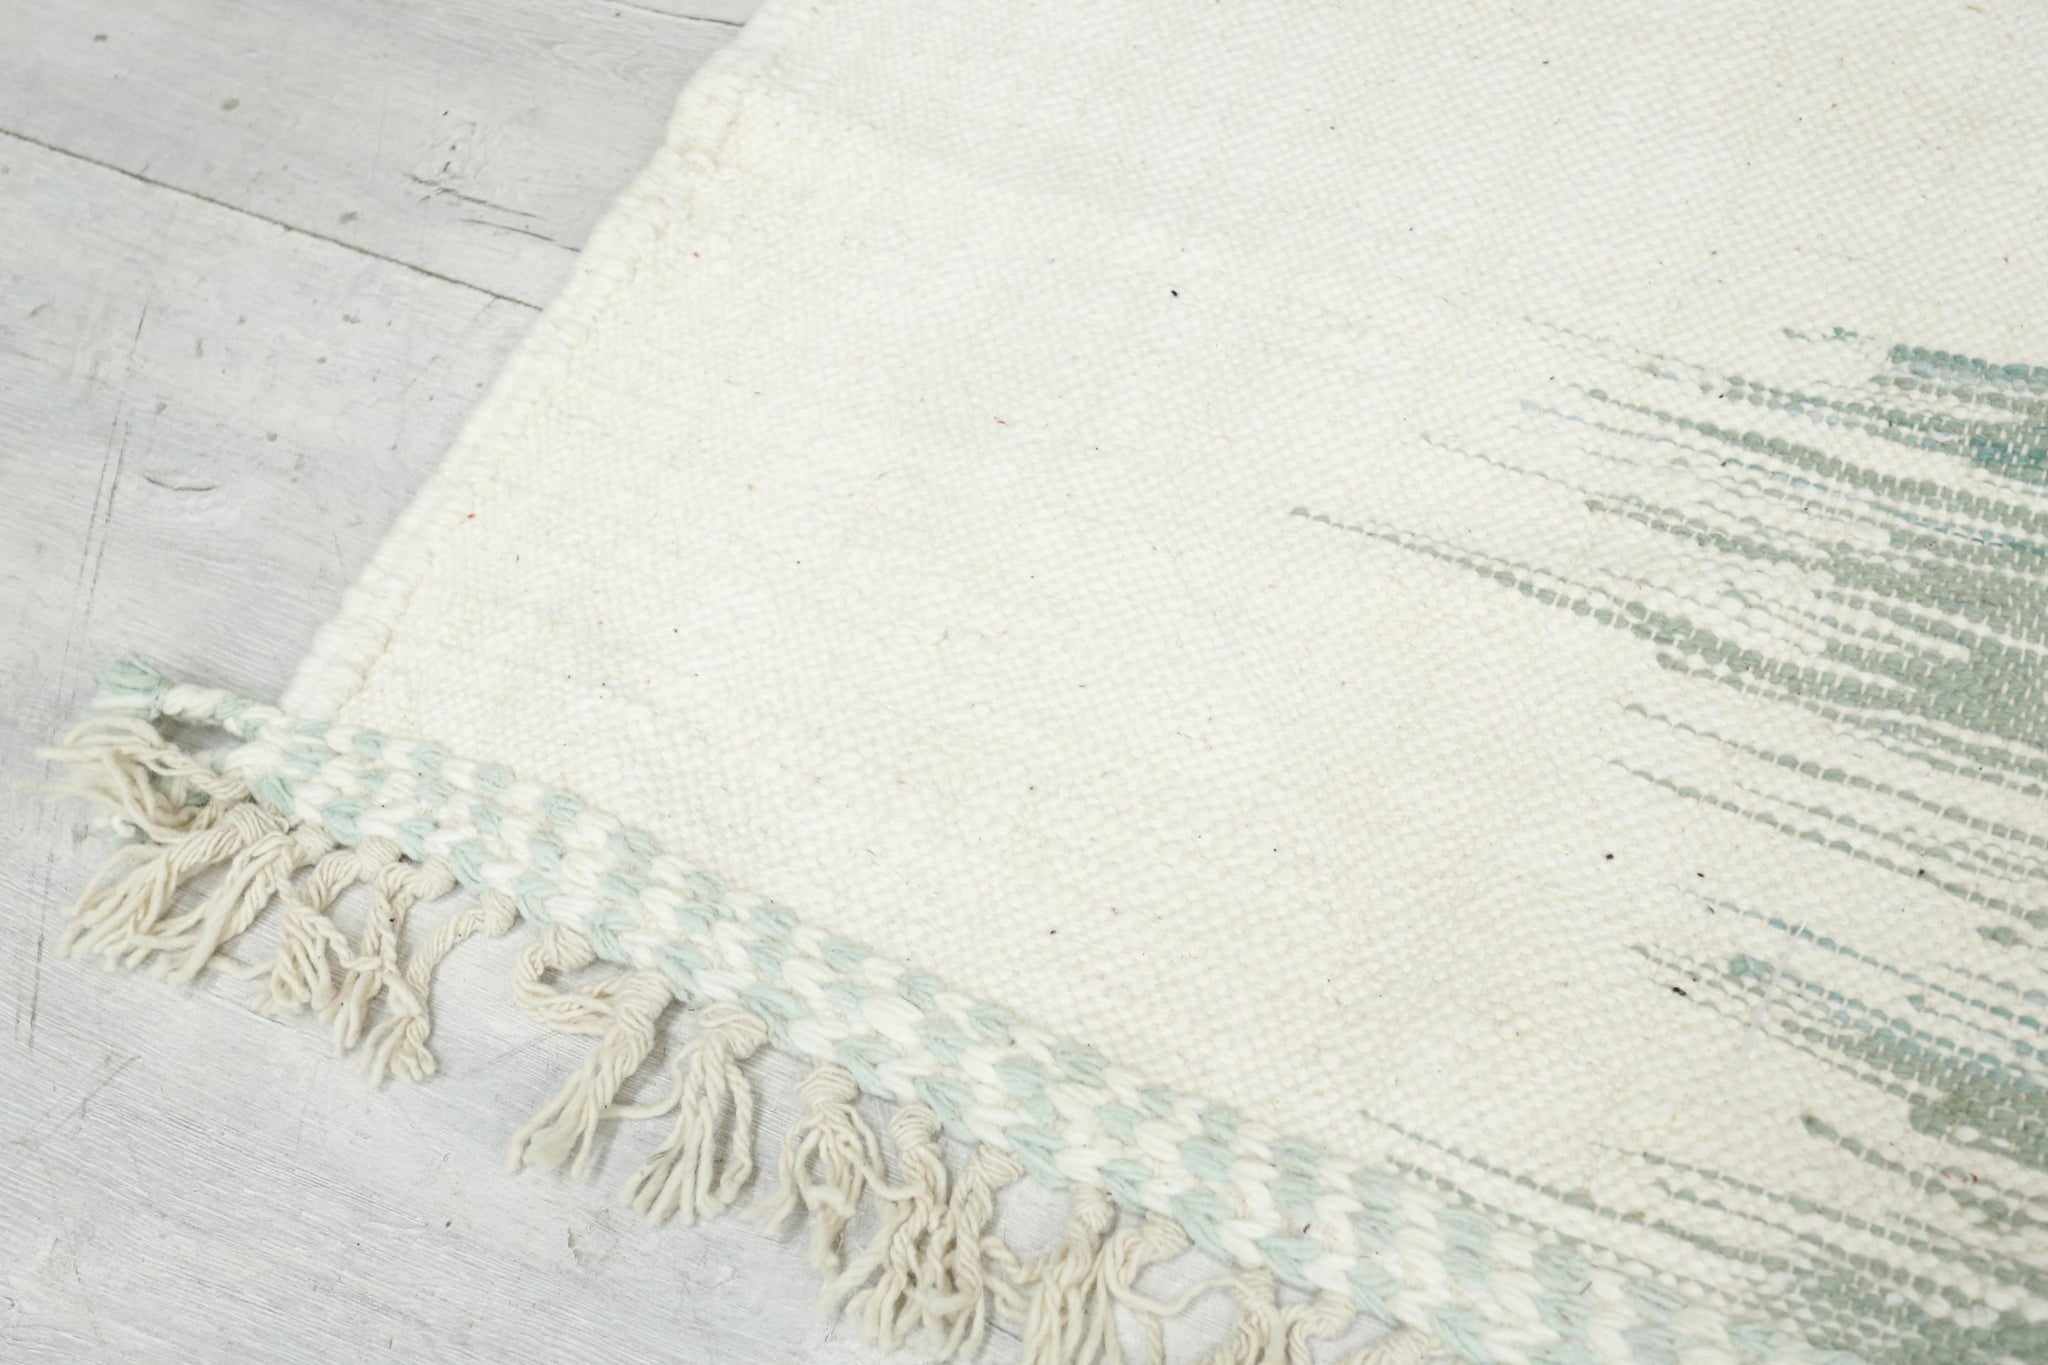 Genuine Hand woven Moroccan rug- Mint Green